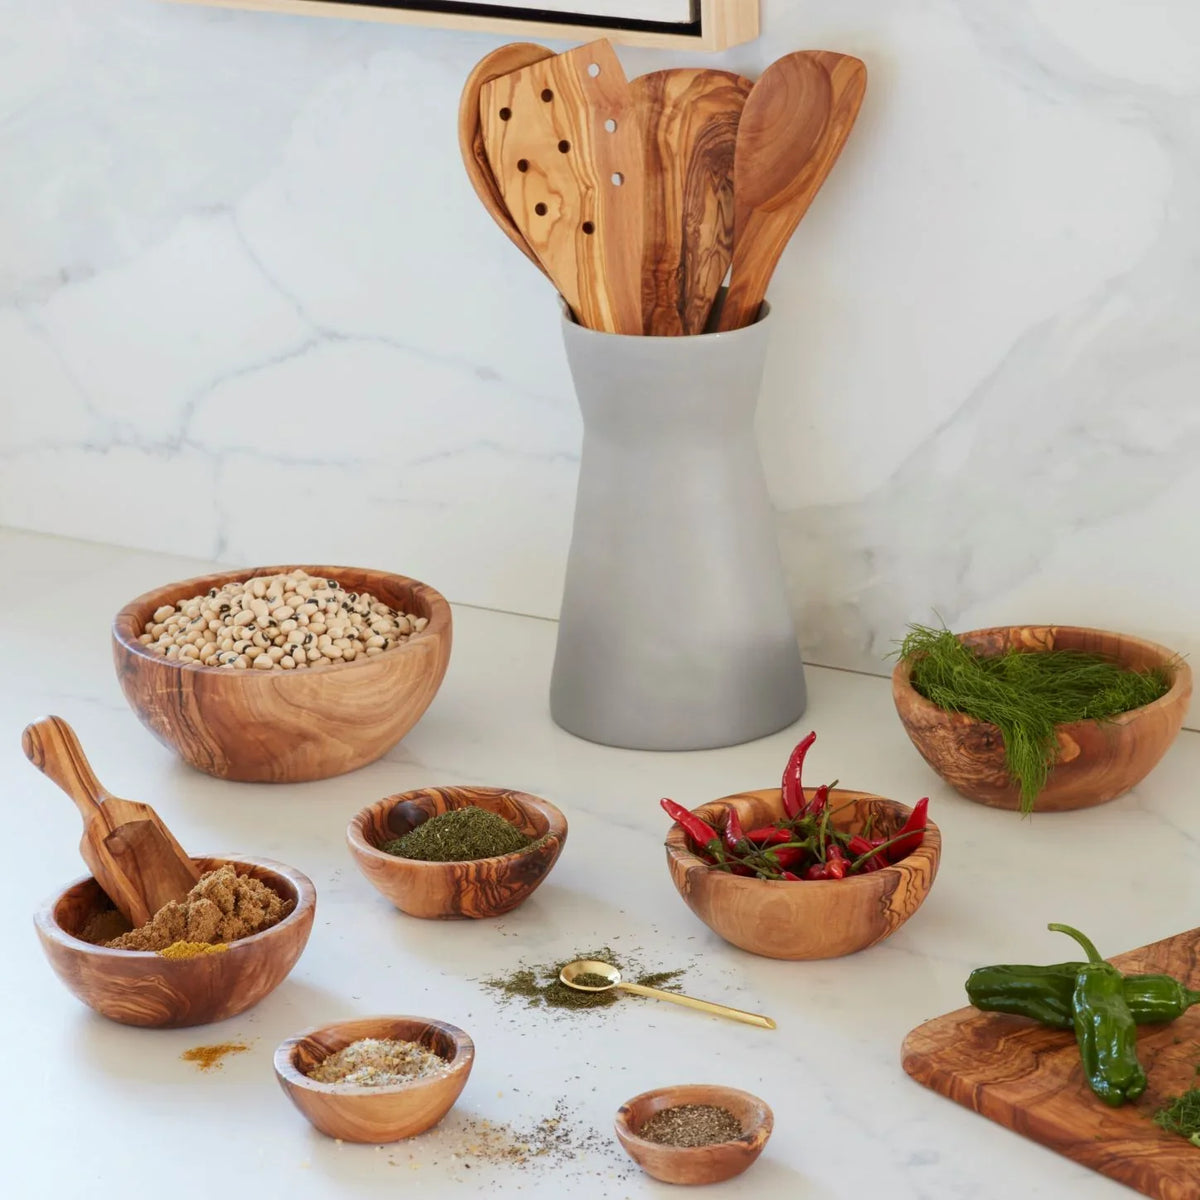 A set of Be Home Olive Wood Nesting Bowls, Set of 6 and spoons on a counter.